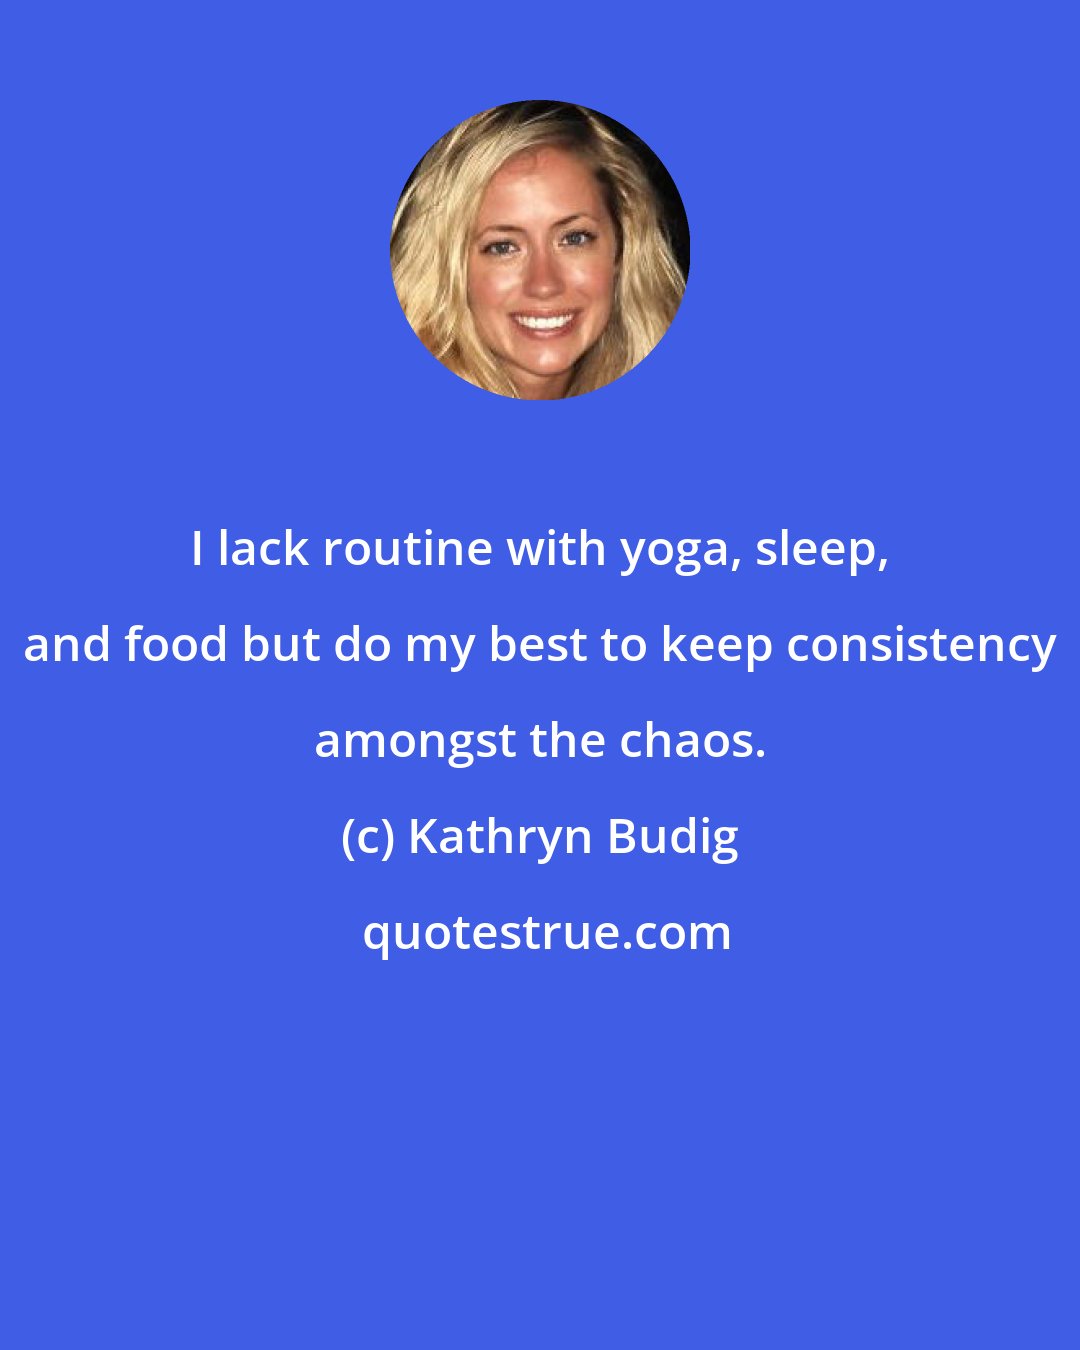 Kathryn Budig: I lack routine with yoga, sleep, and food but do my best to keep consistency amongst the chaos.